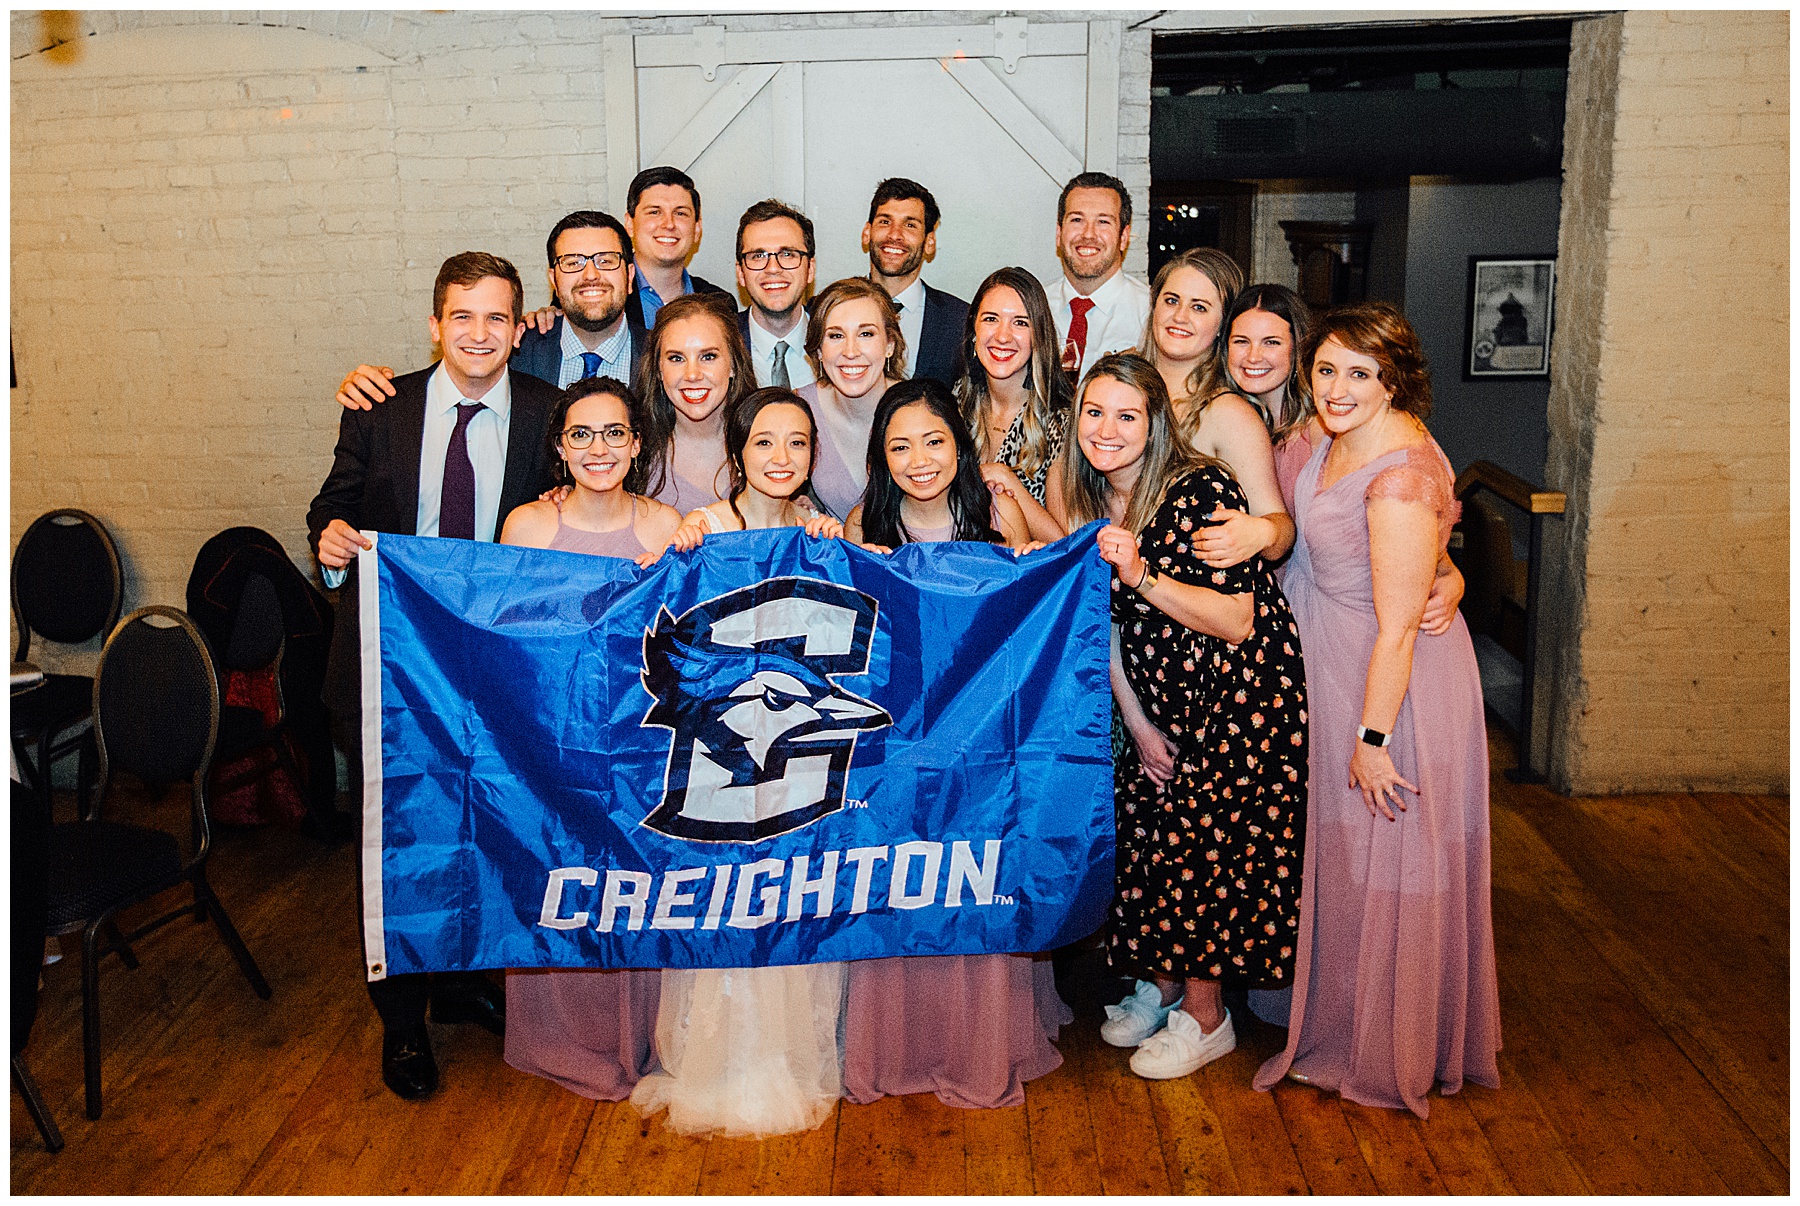 Friends holding Creighton flag during at wedding reception